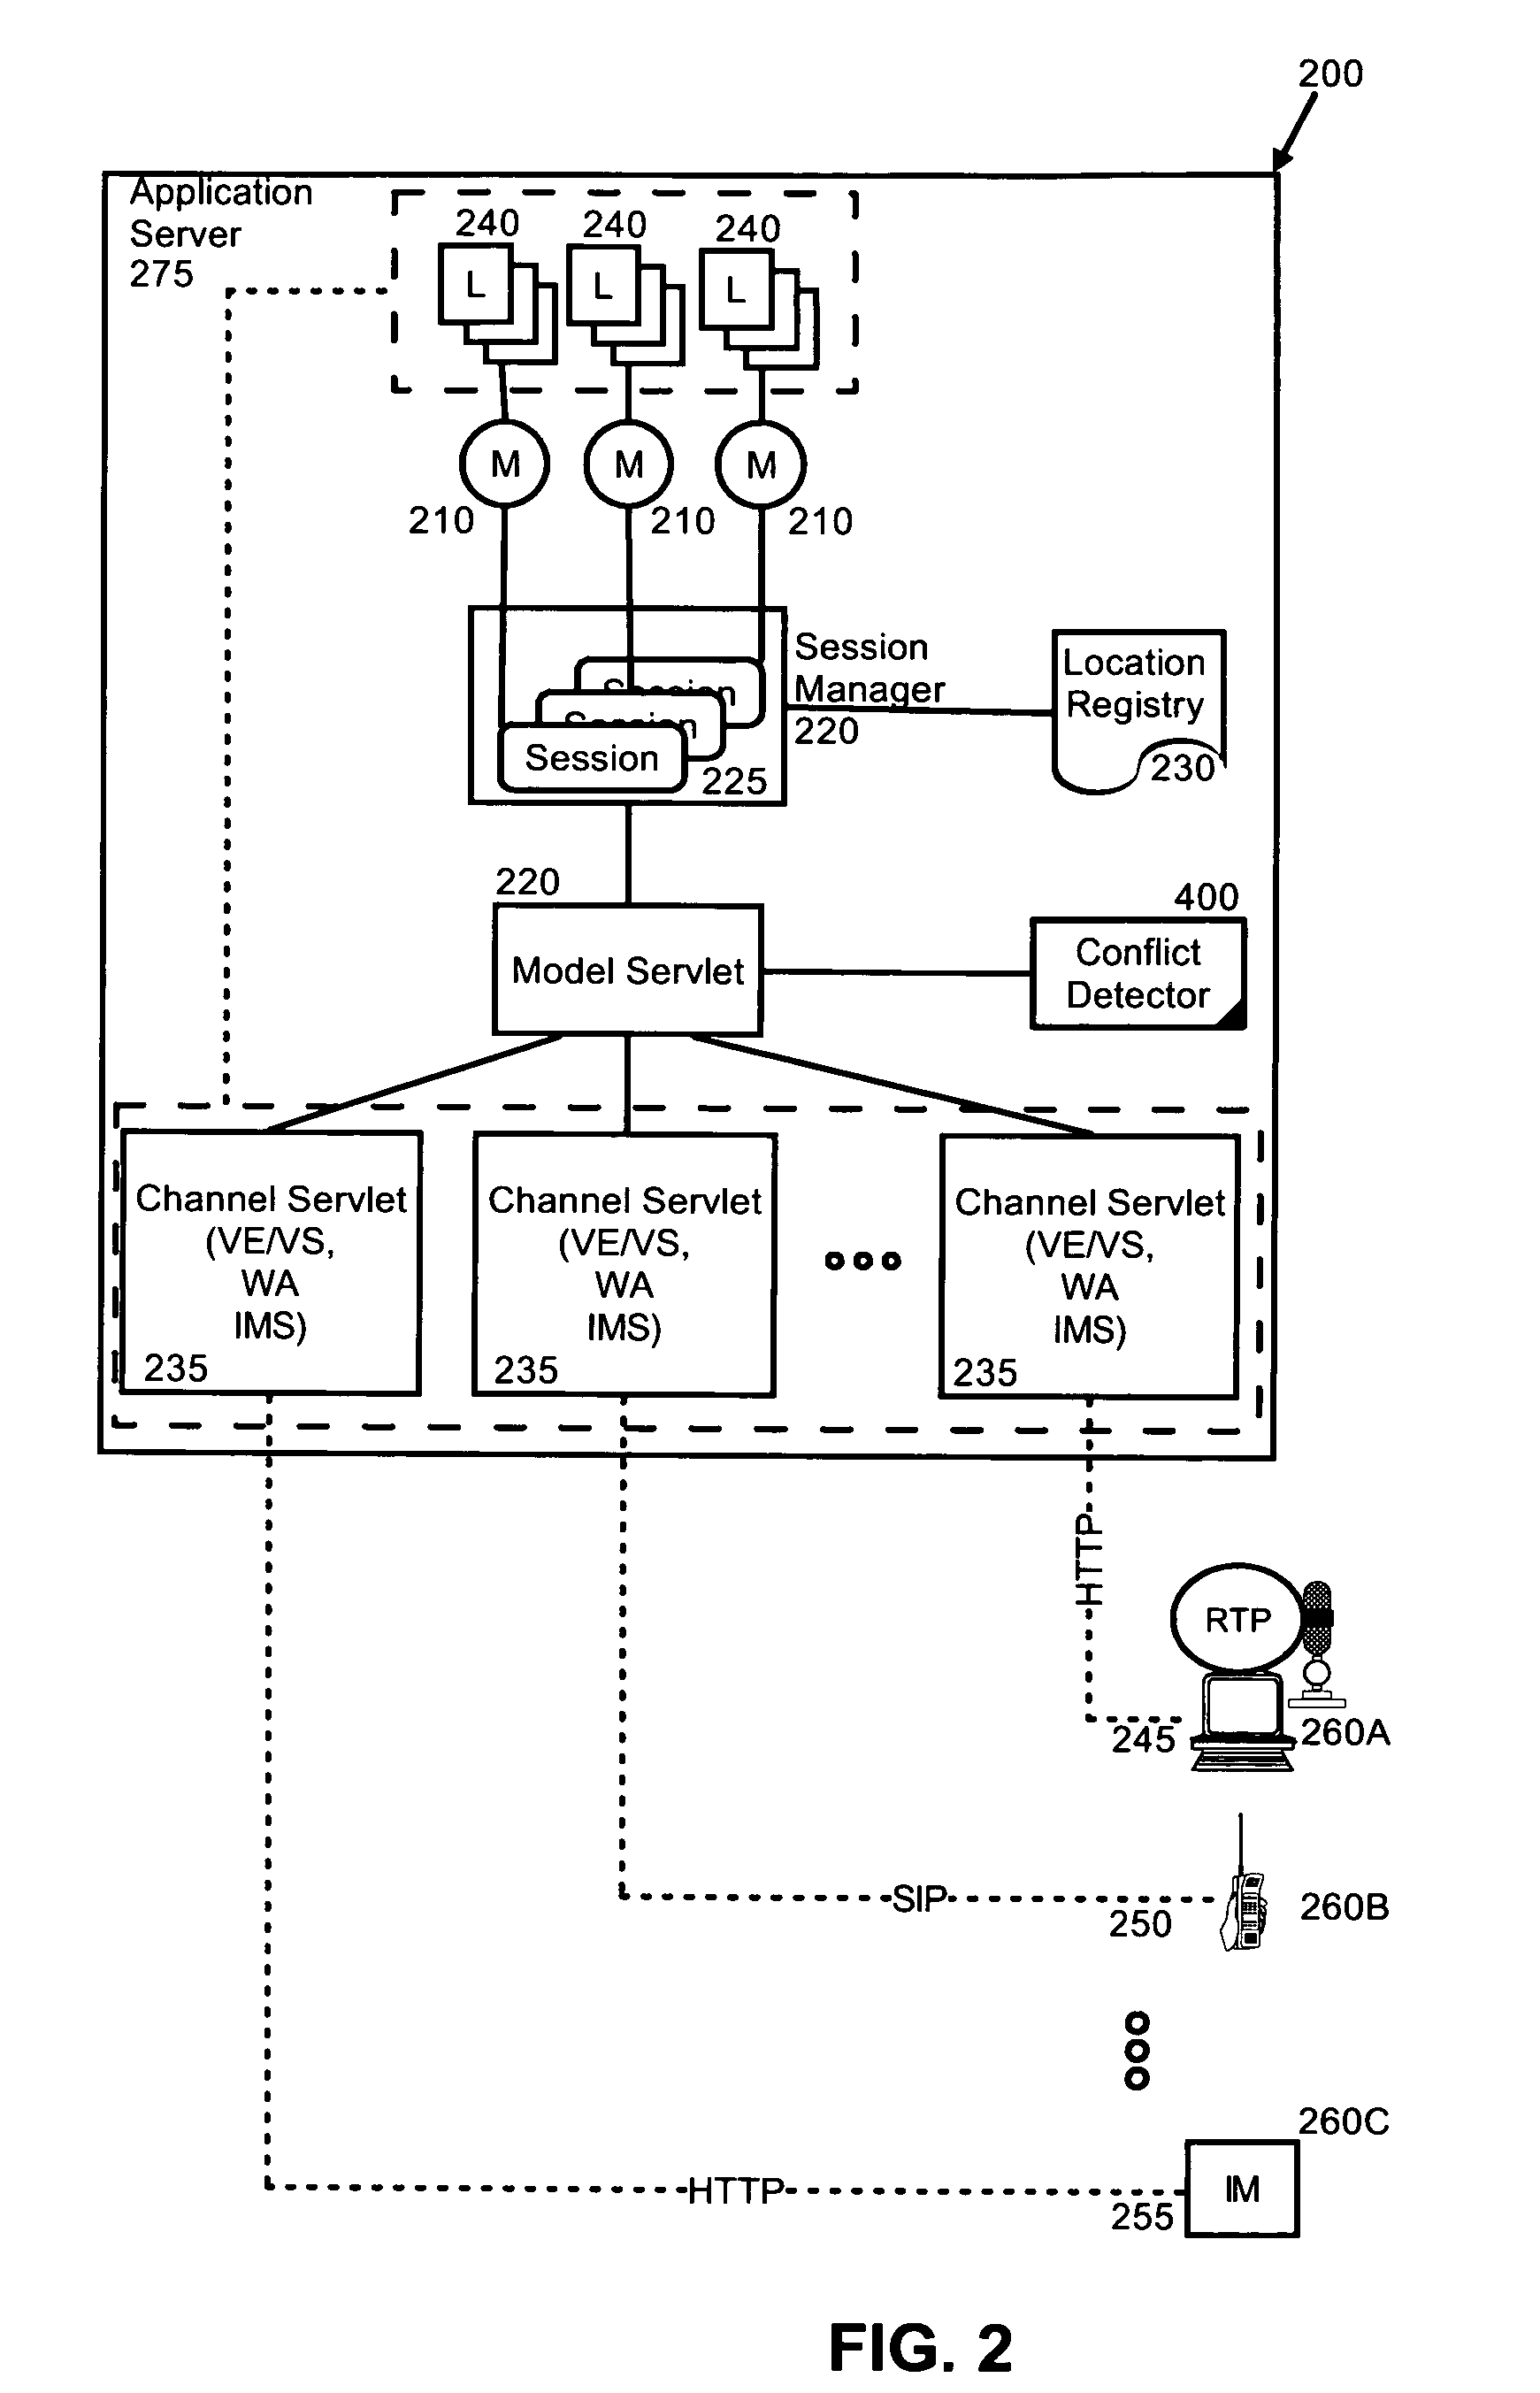 Managing concurrent data updates in a composite services delivery system